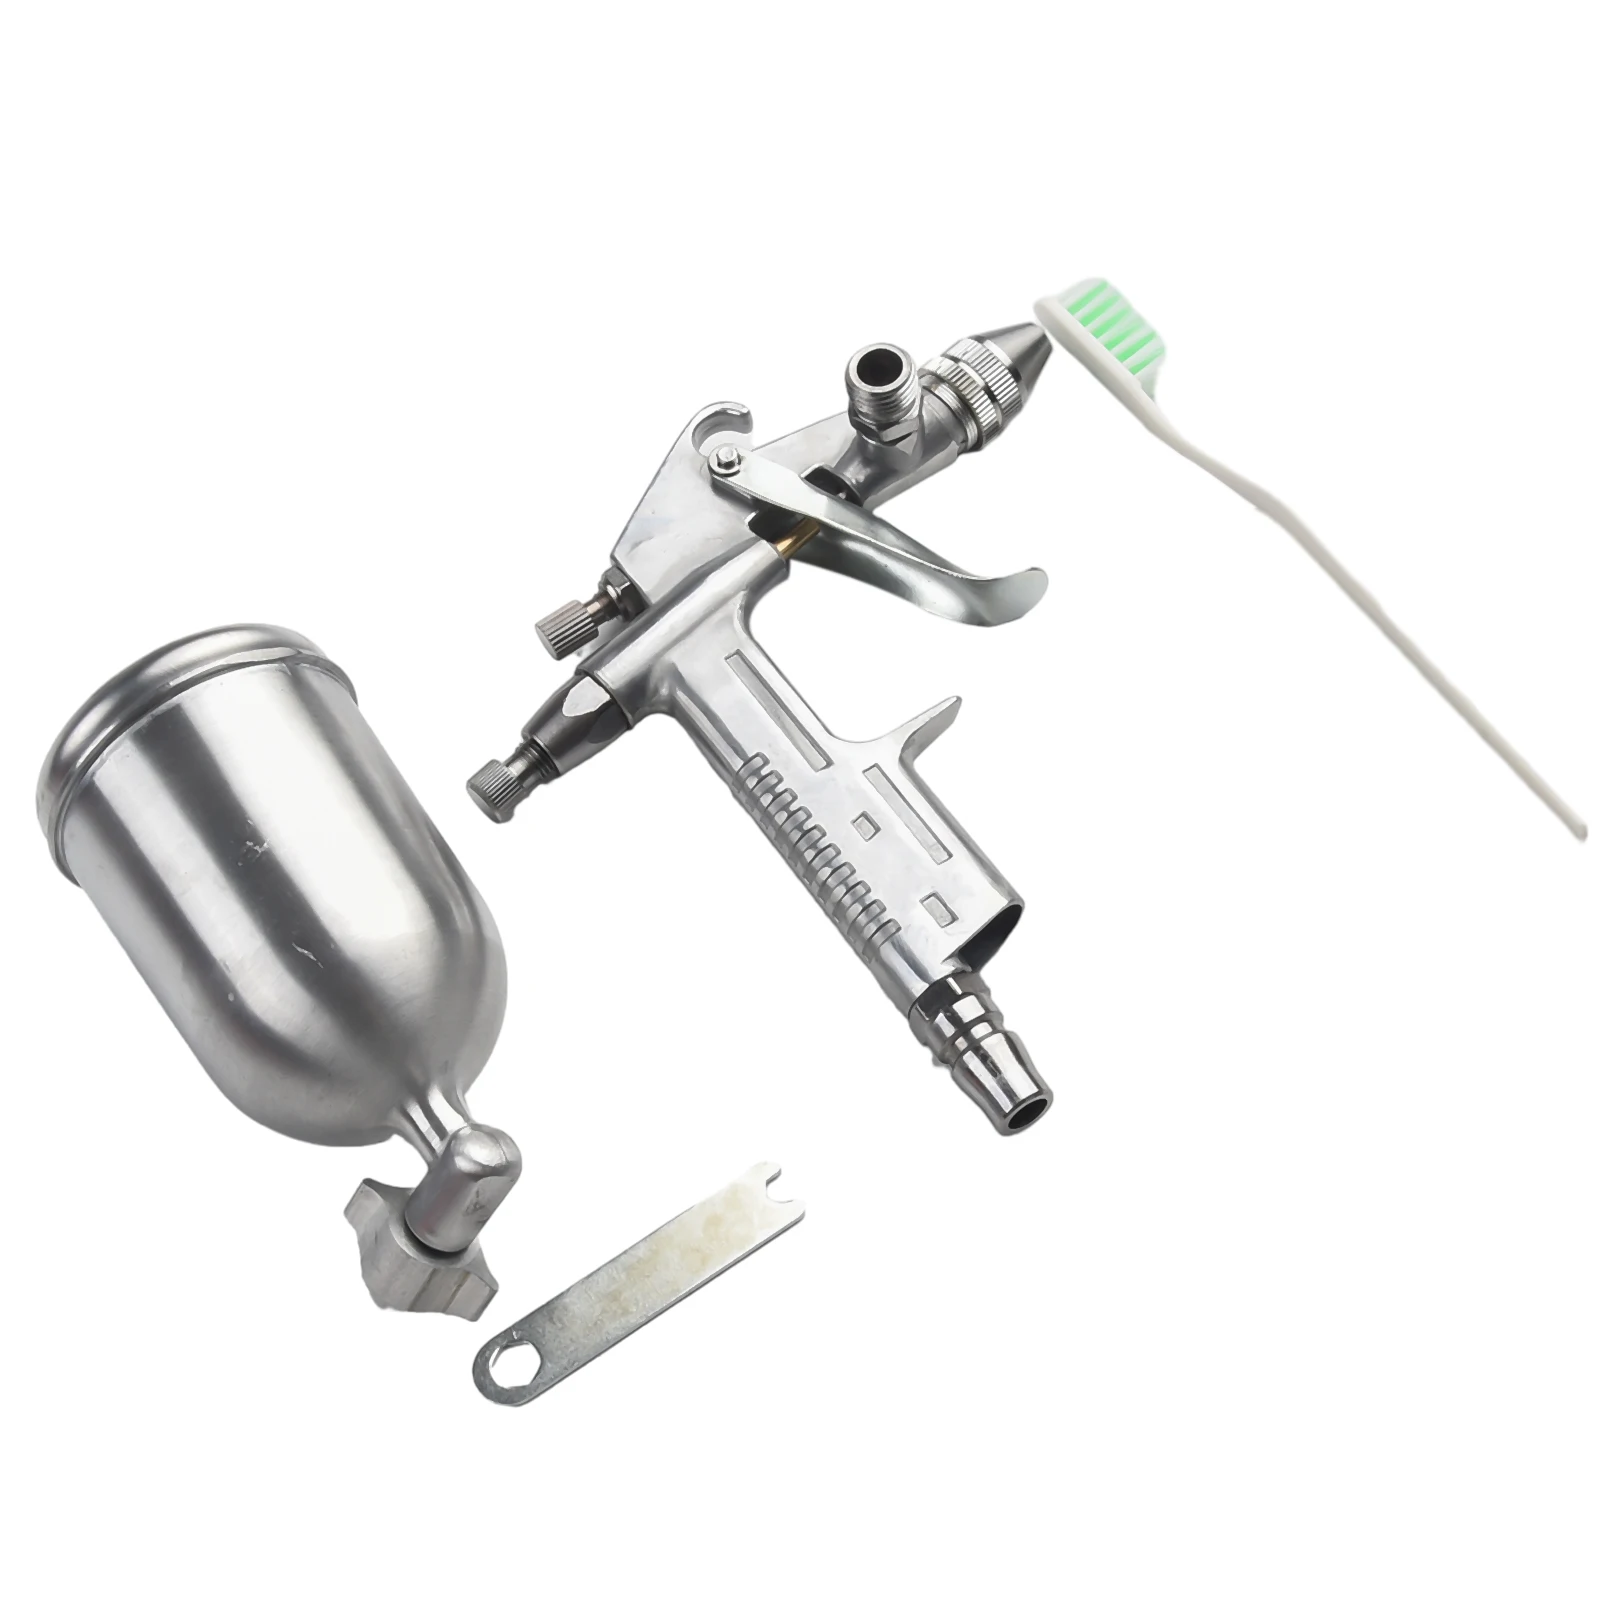 K-3 0.5mm Nozzle 125ml Spray Gun Professional Pneumatic Airbrush Sprayer Alloy Painting Atomizer Tool For Painting Cars